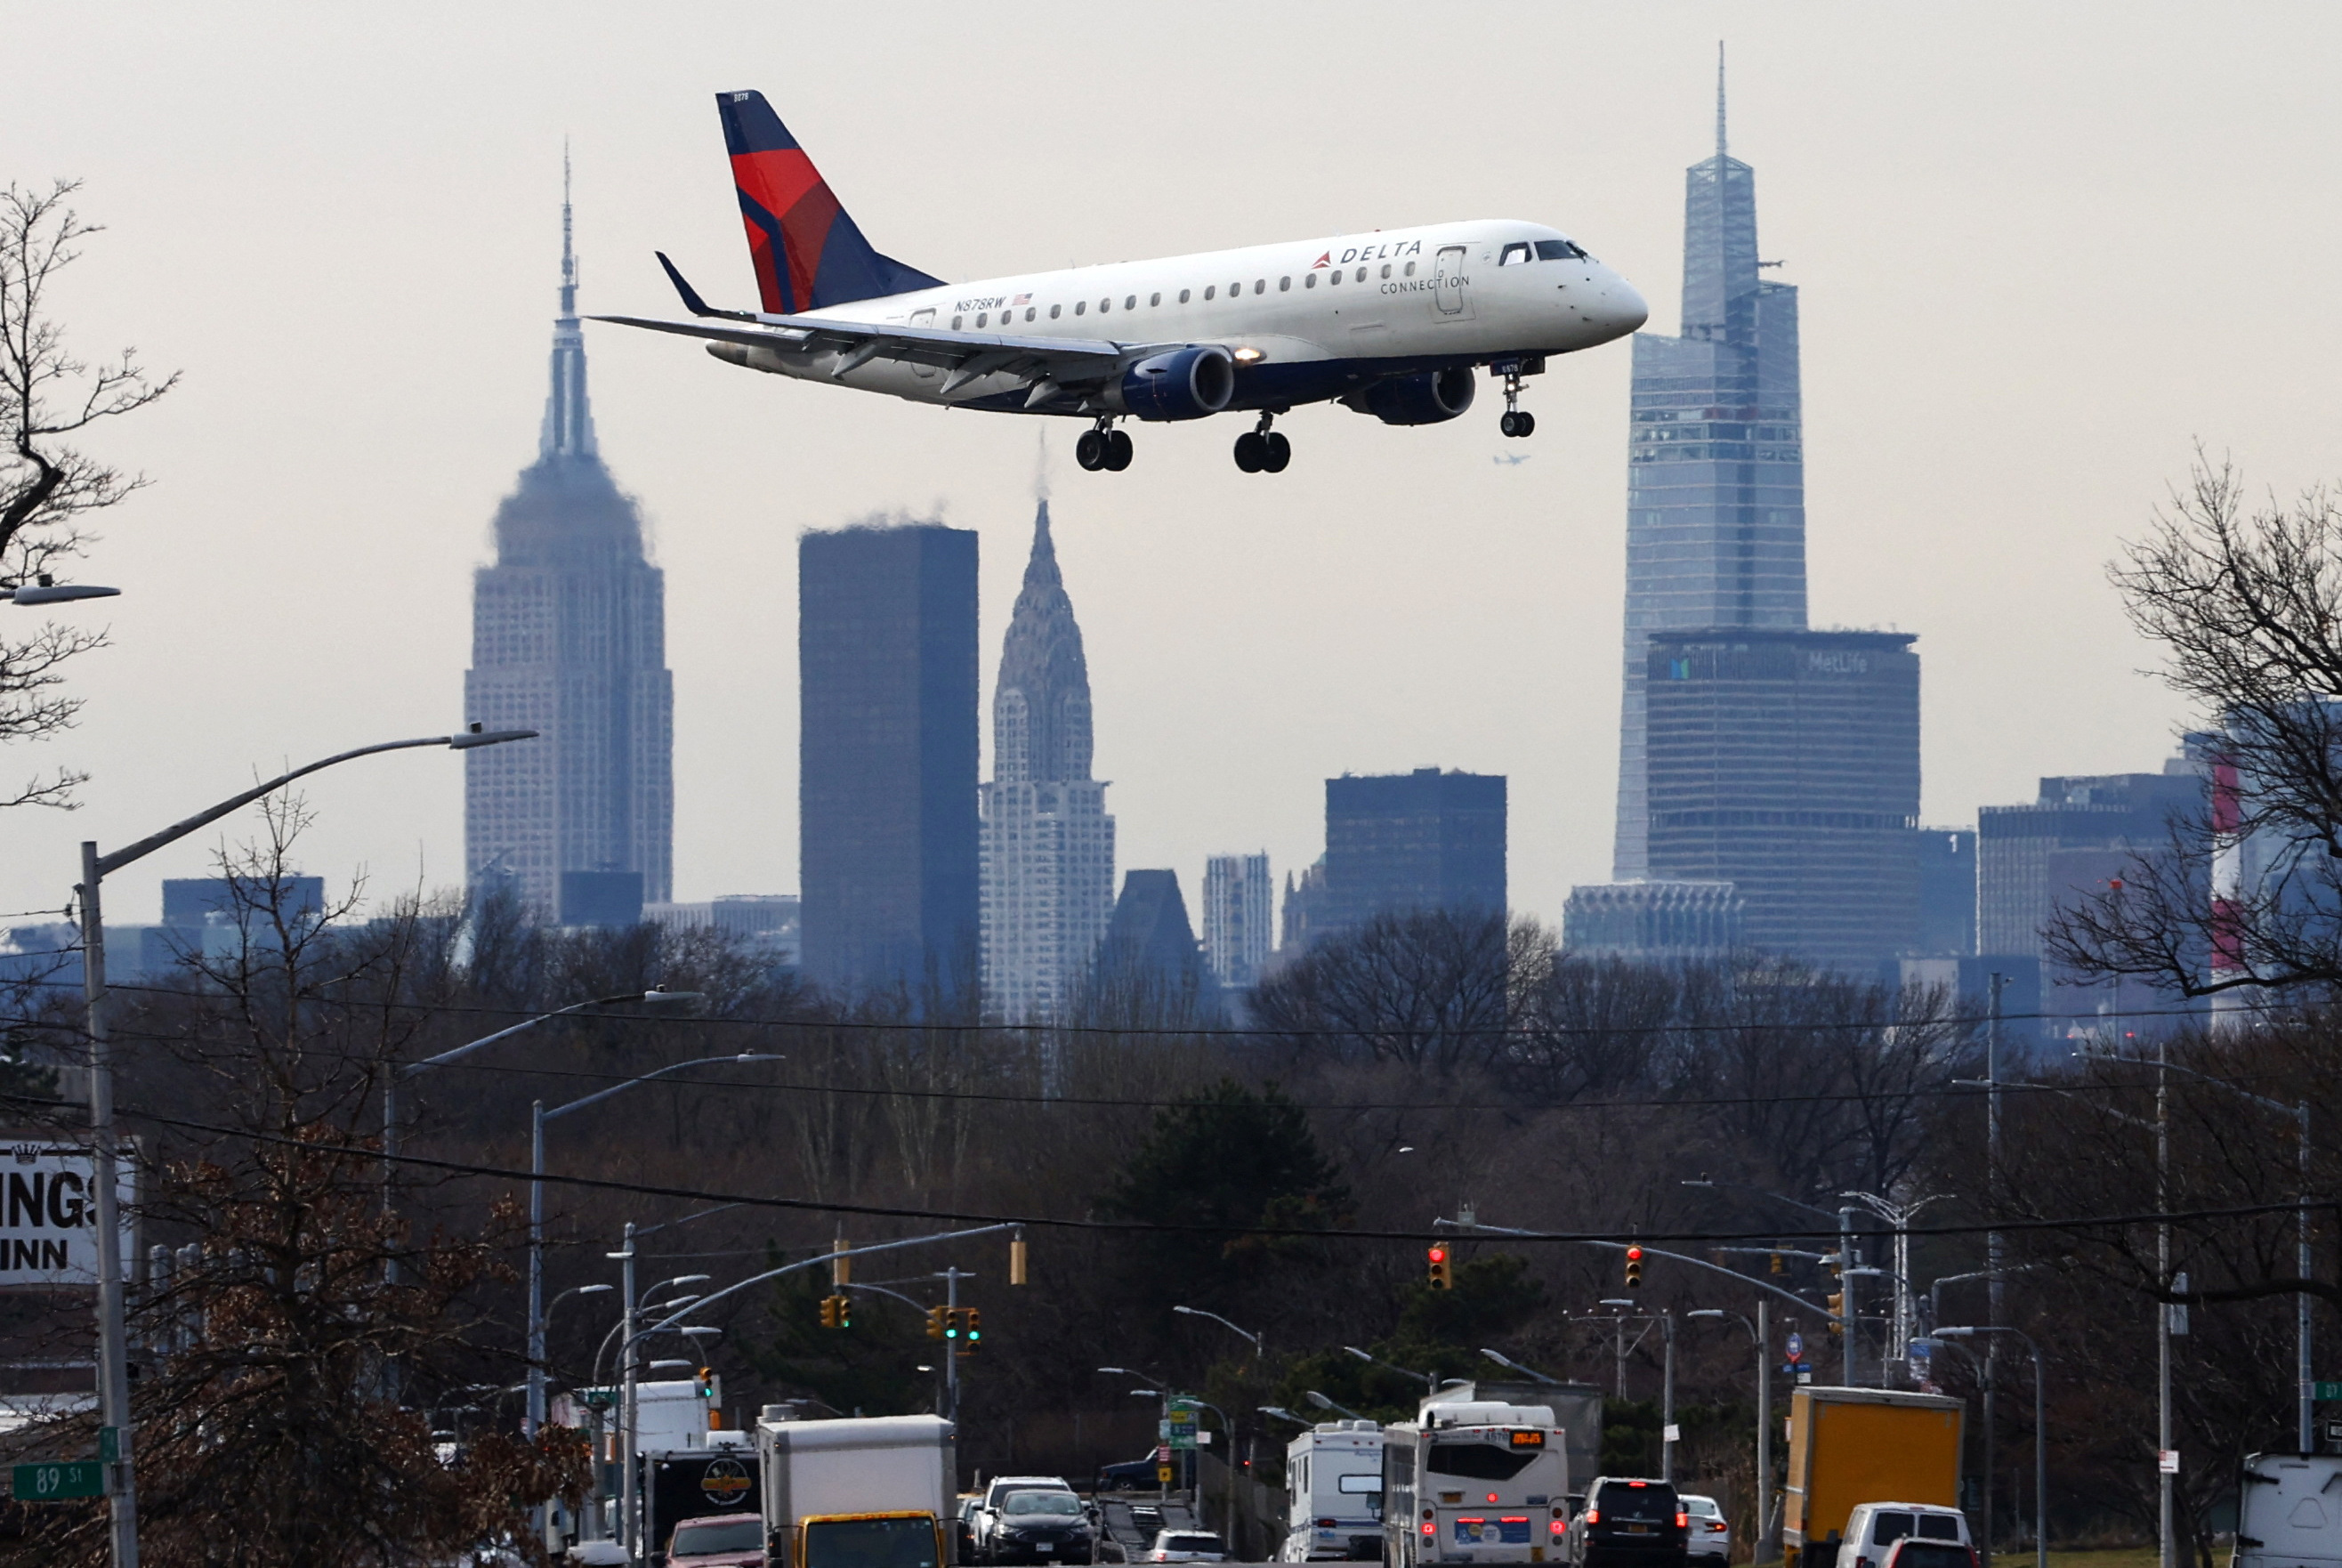 Planes resume flights after FAA systems outage at New York's LaGuardia Airport